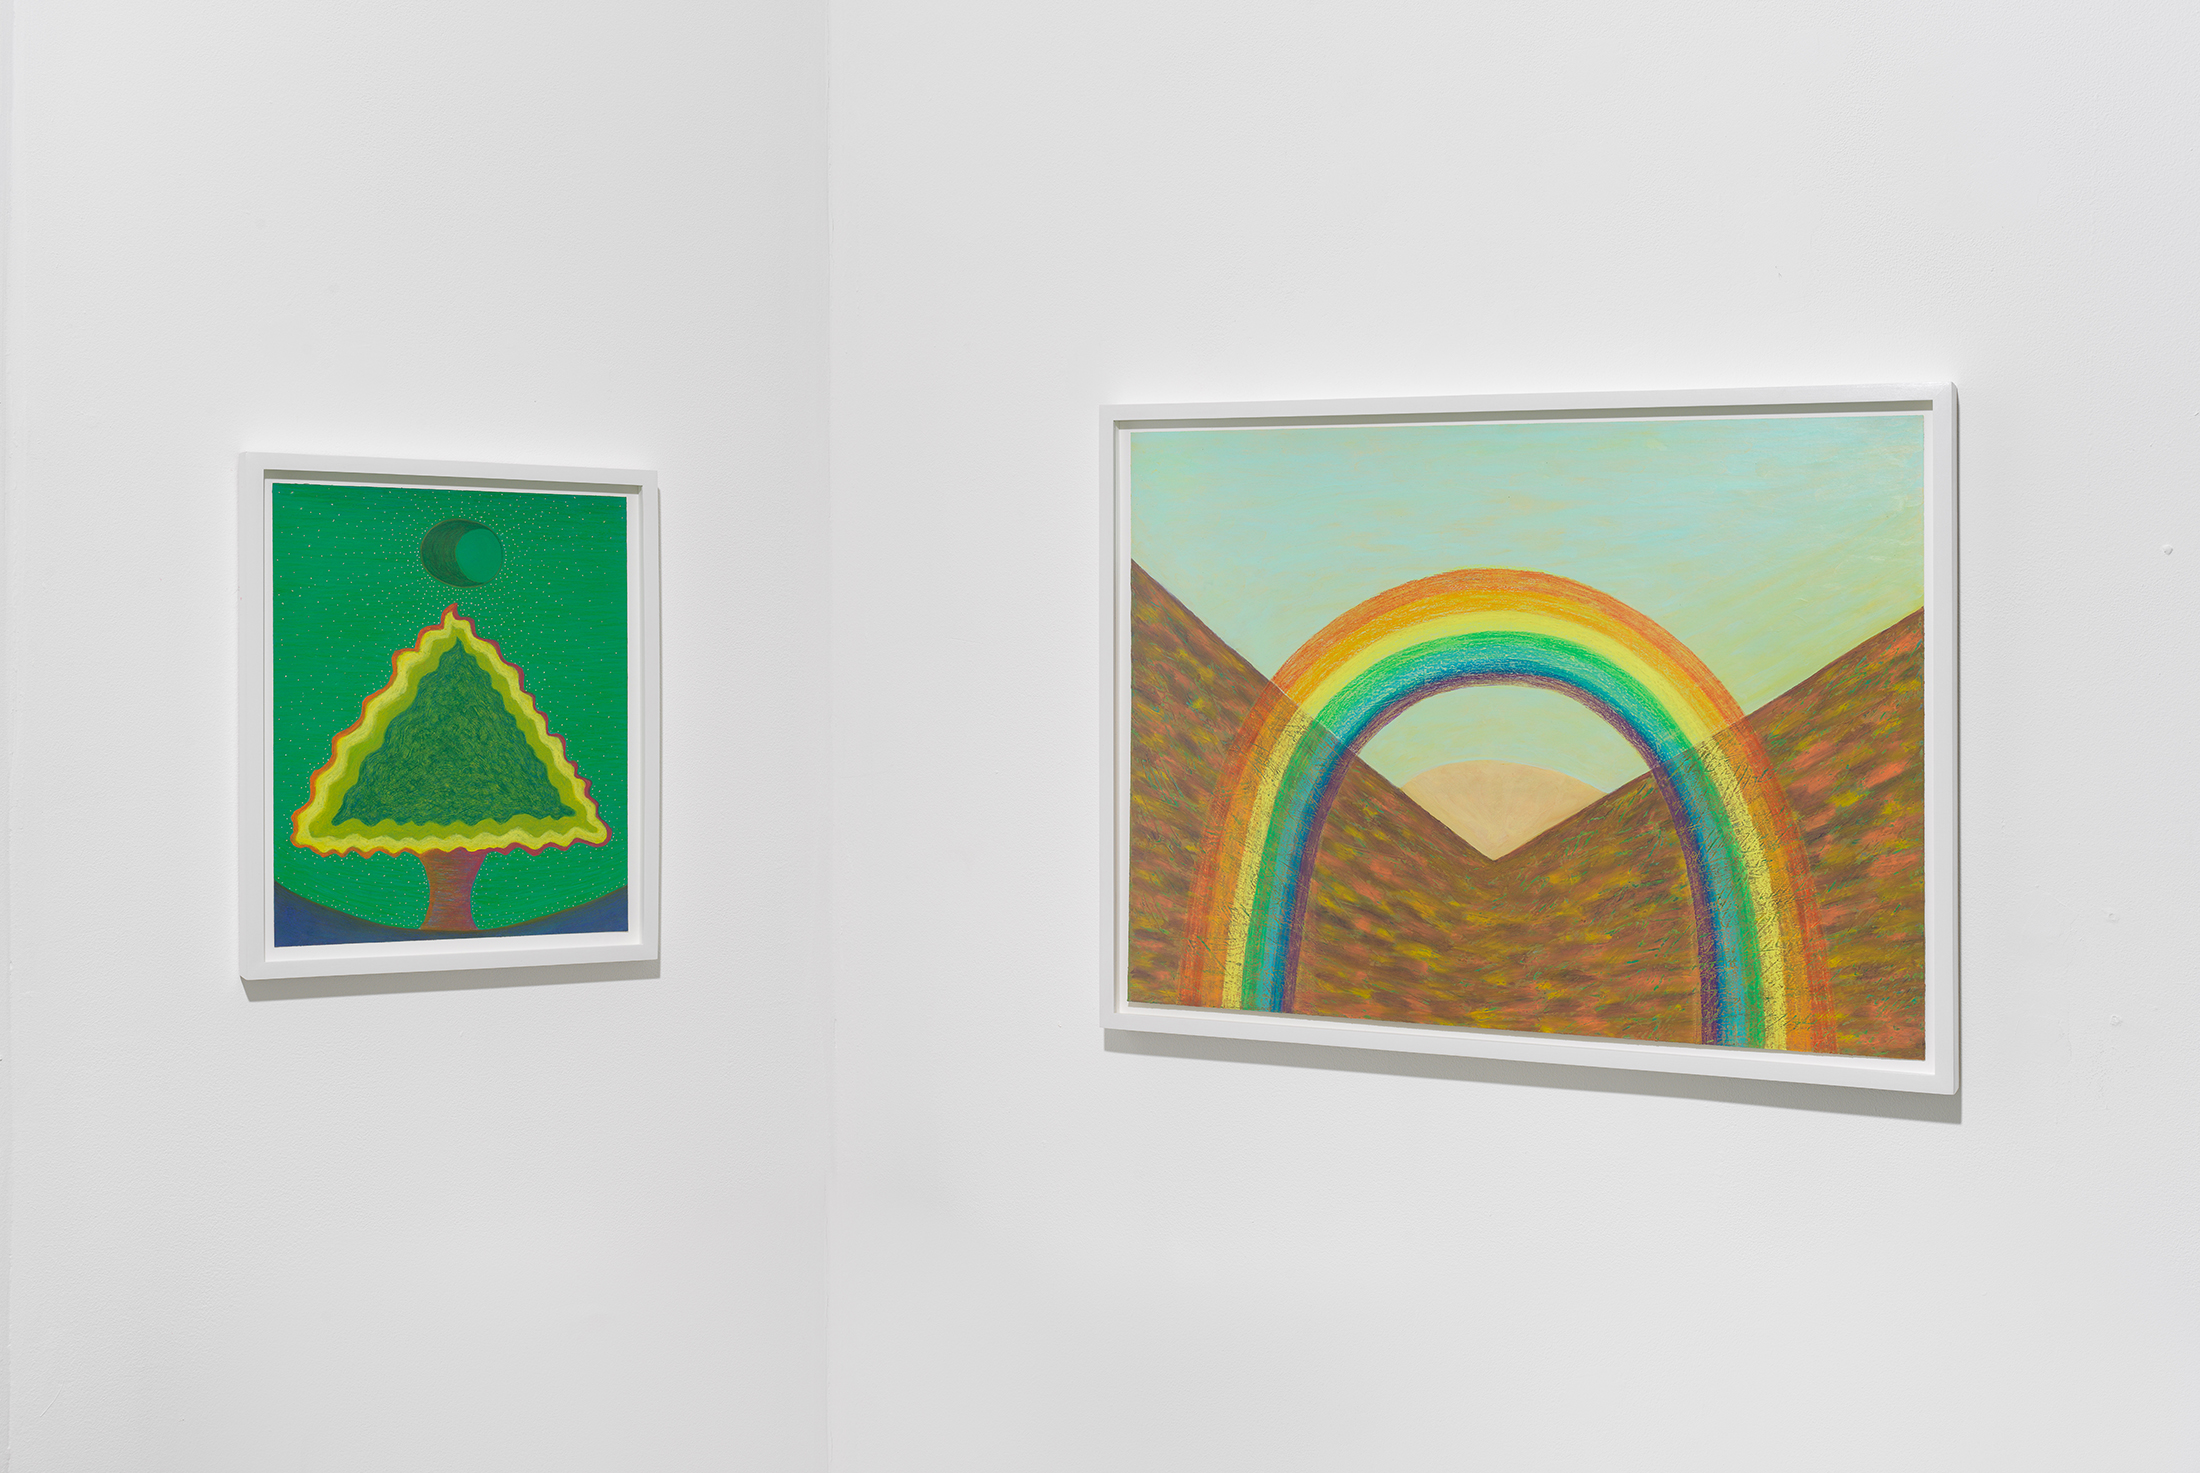 Ping Zheng Installation view showing framed works on paper: 'A Magical Tree,' and 'Rainbow Over Dry Land'